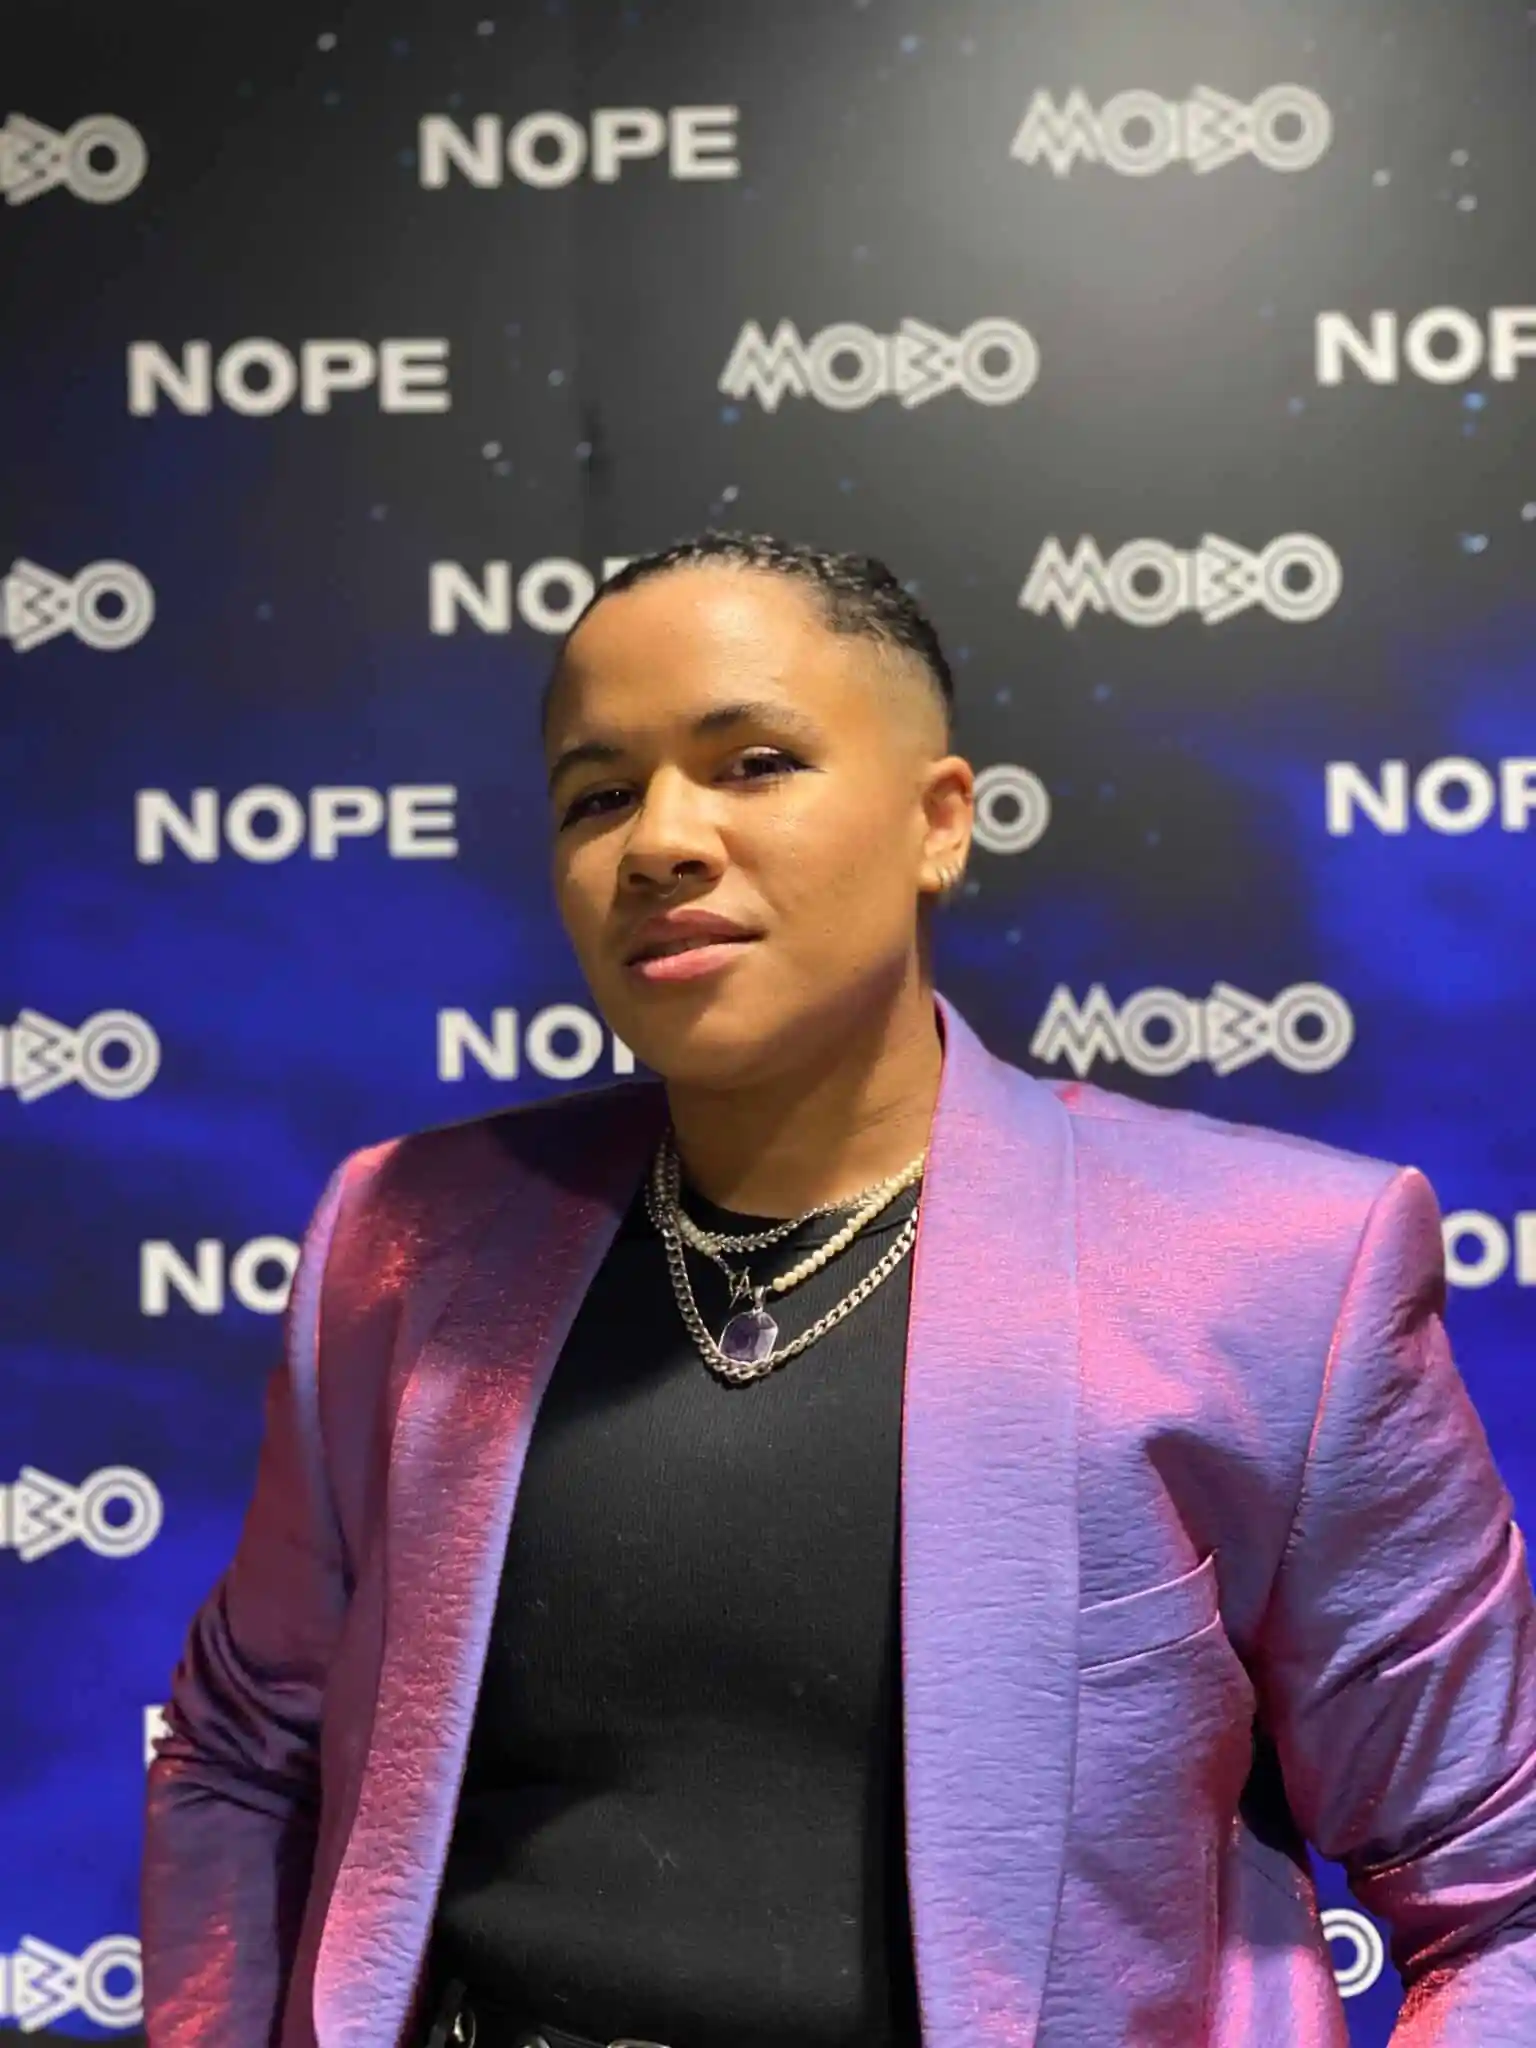 Ki Griffin wearing a purple blazer and a black top at an event.